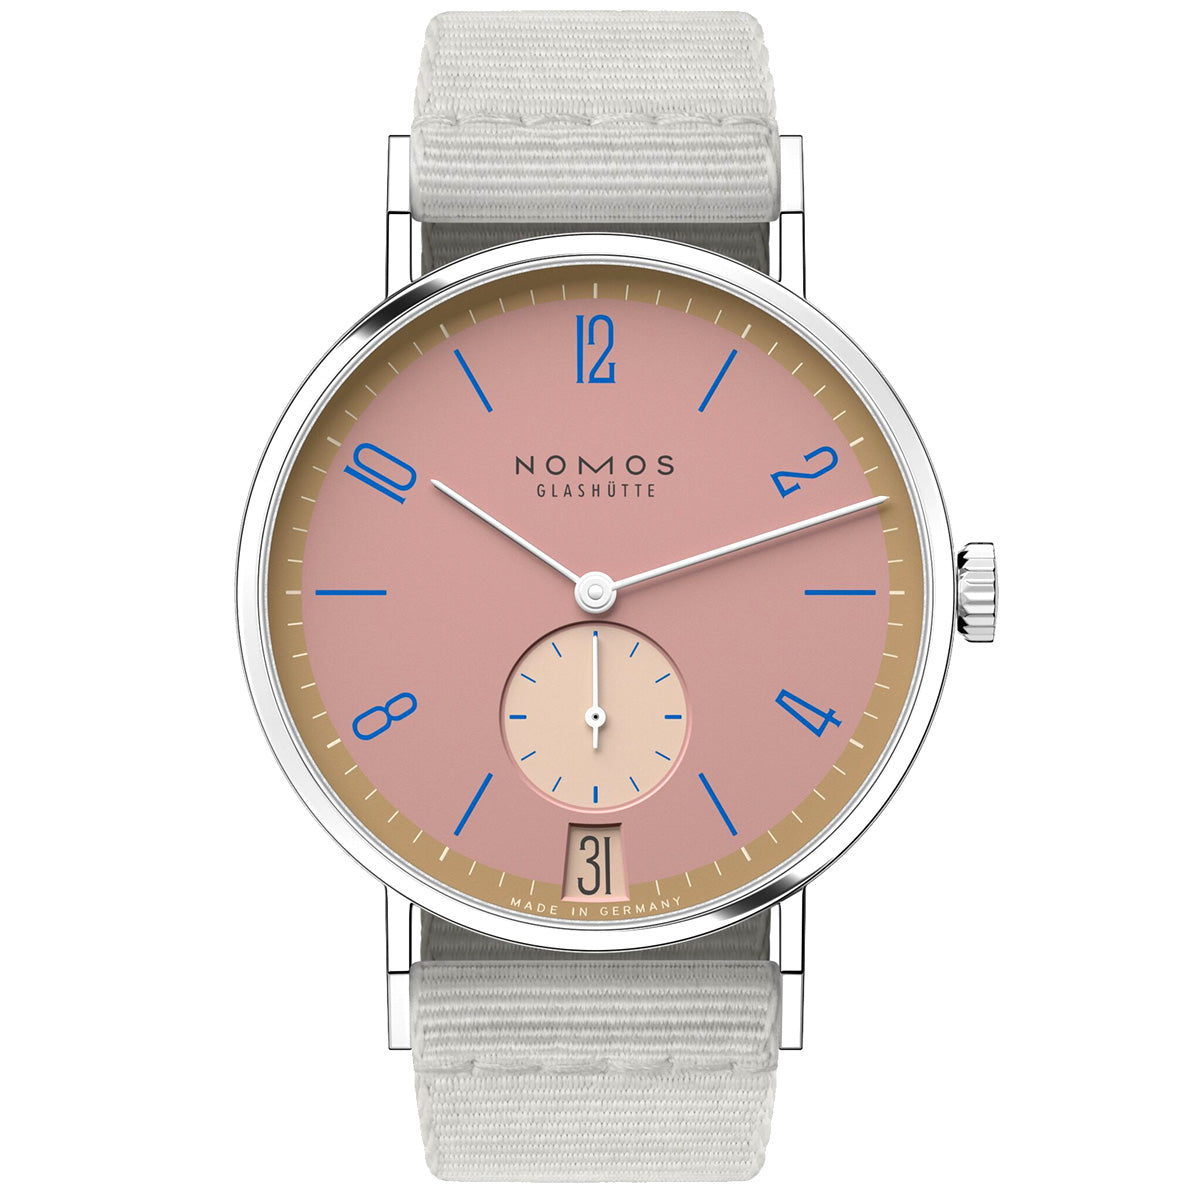 Tangente 38mm 'Pompadour' Limited Edition Watch